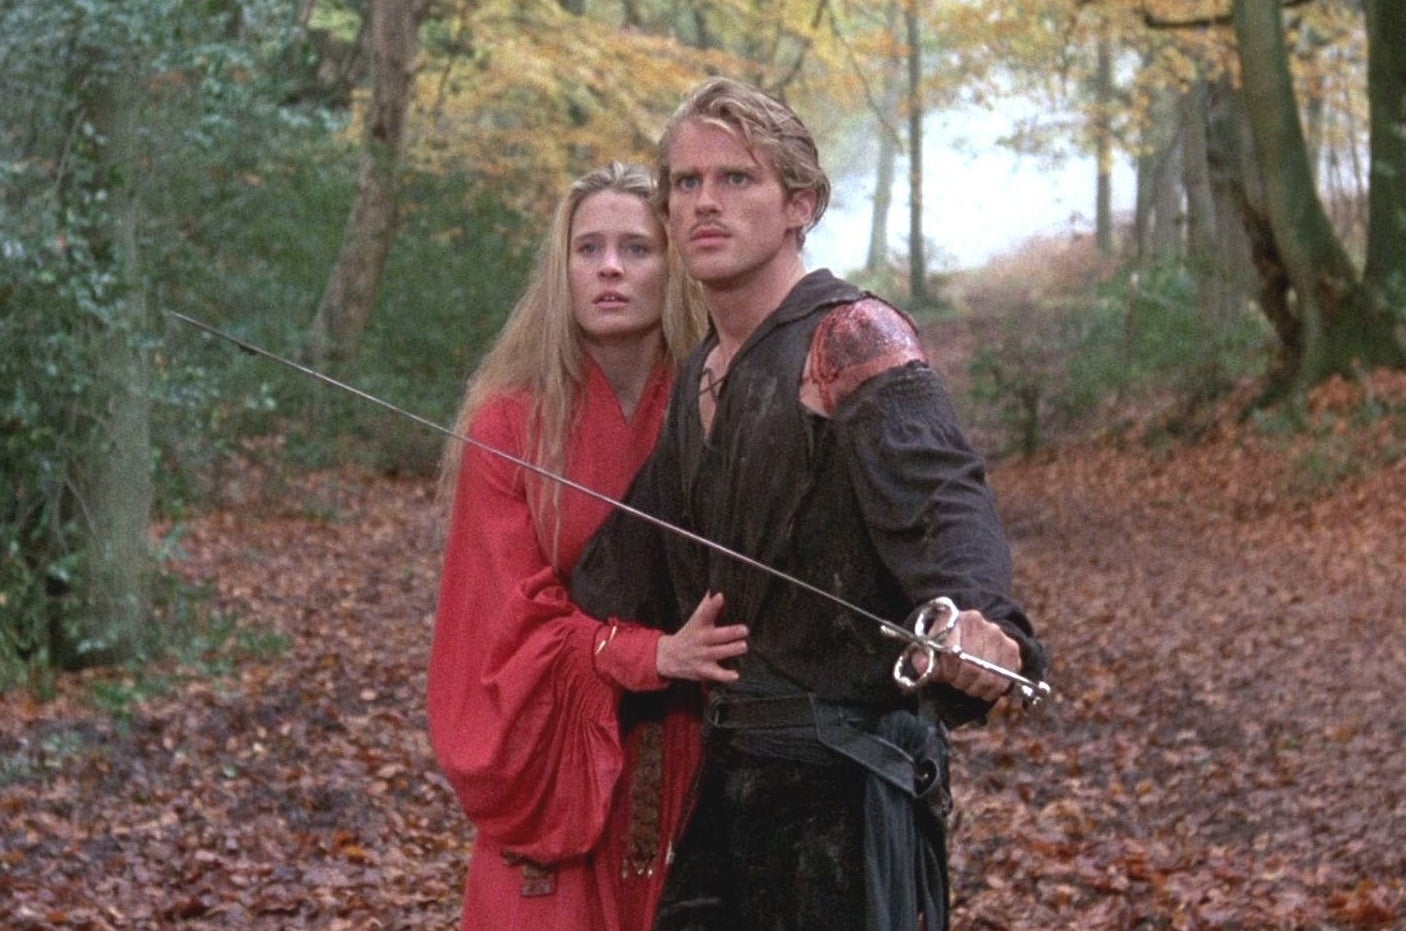 Westley and Buttercup in the forest; Westley has his sword drawn, while protecting Buttercup